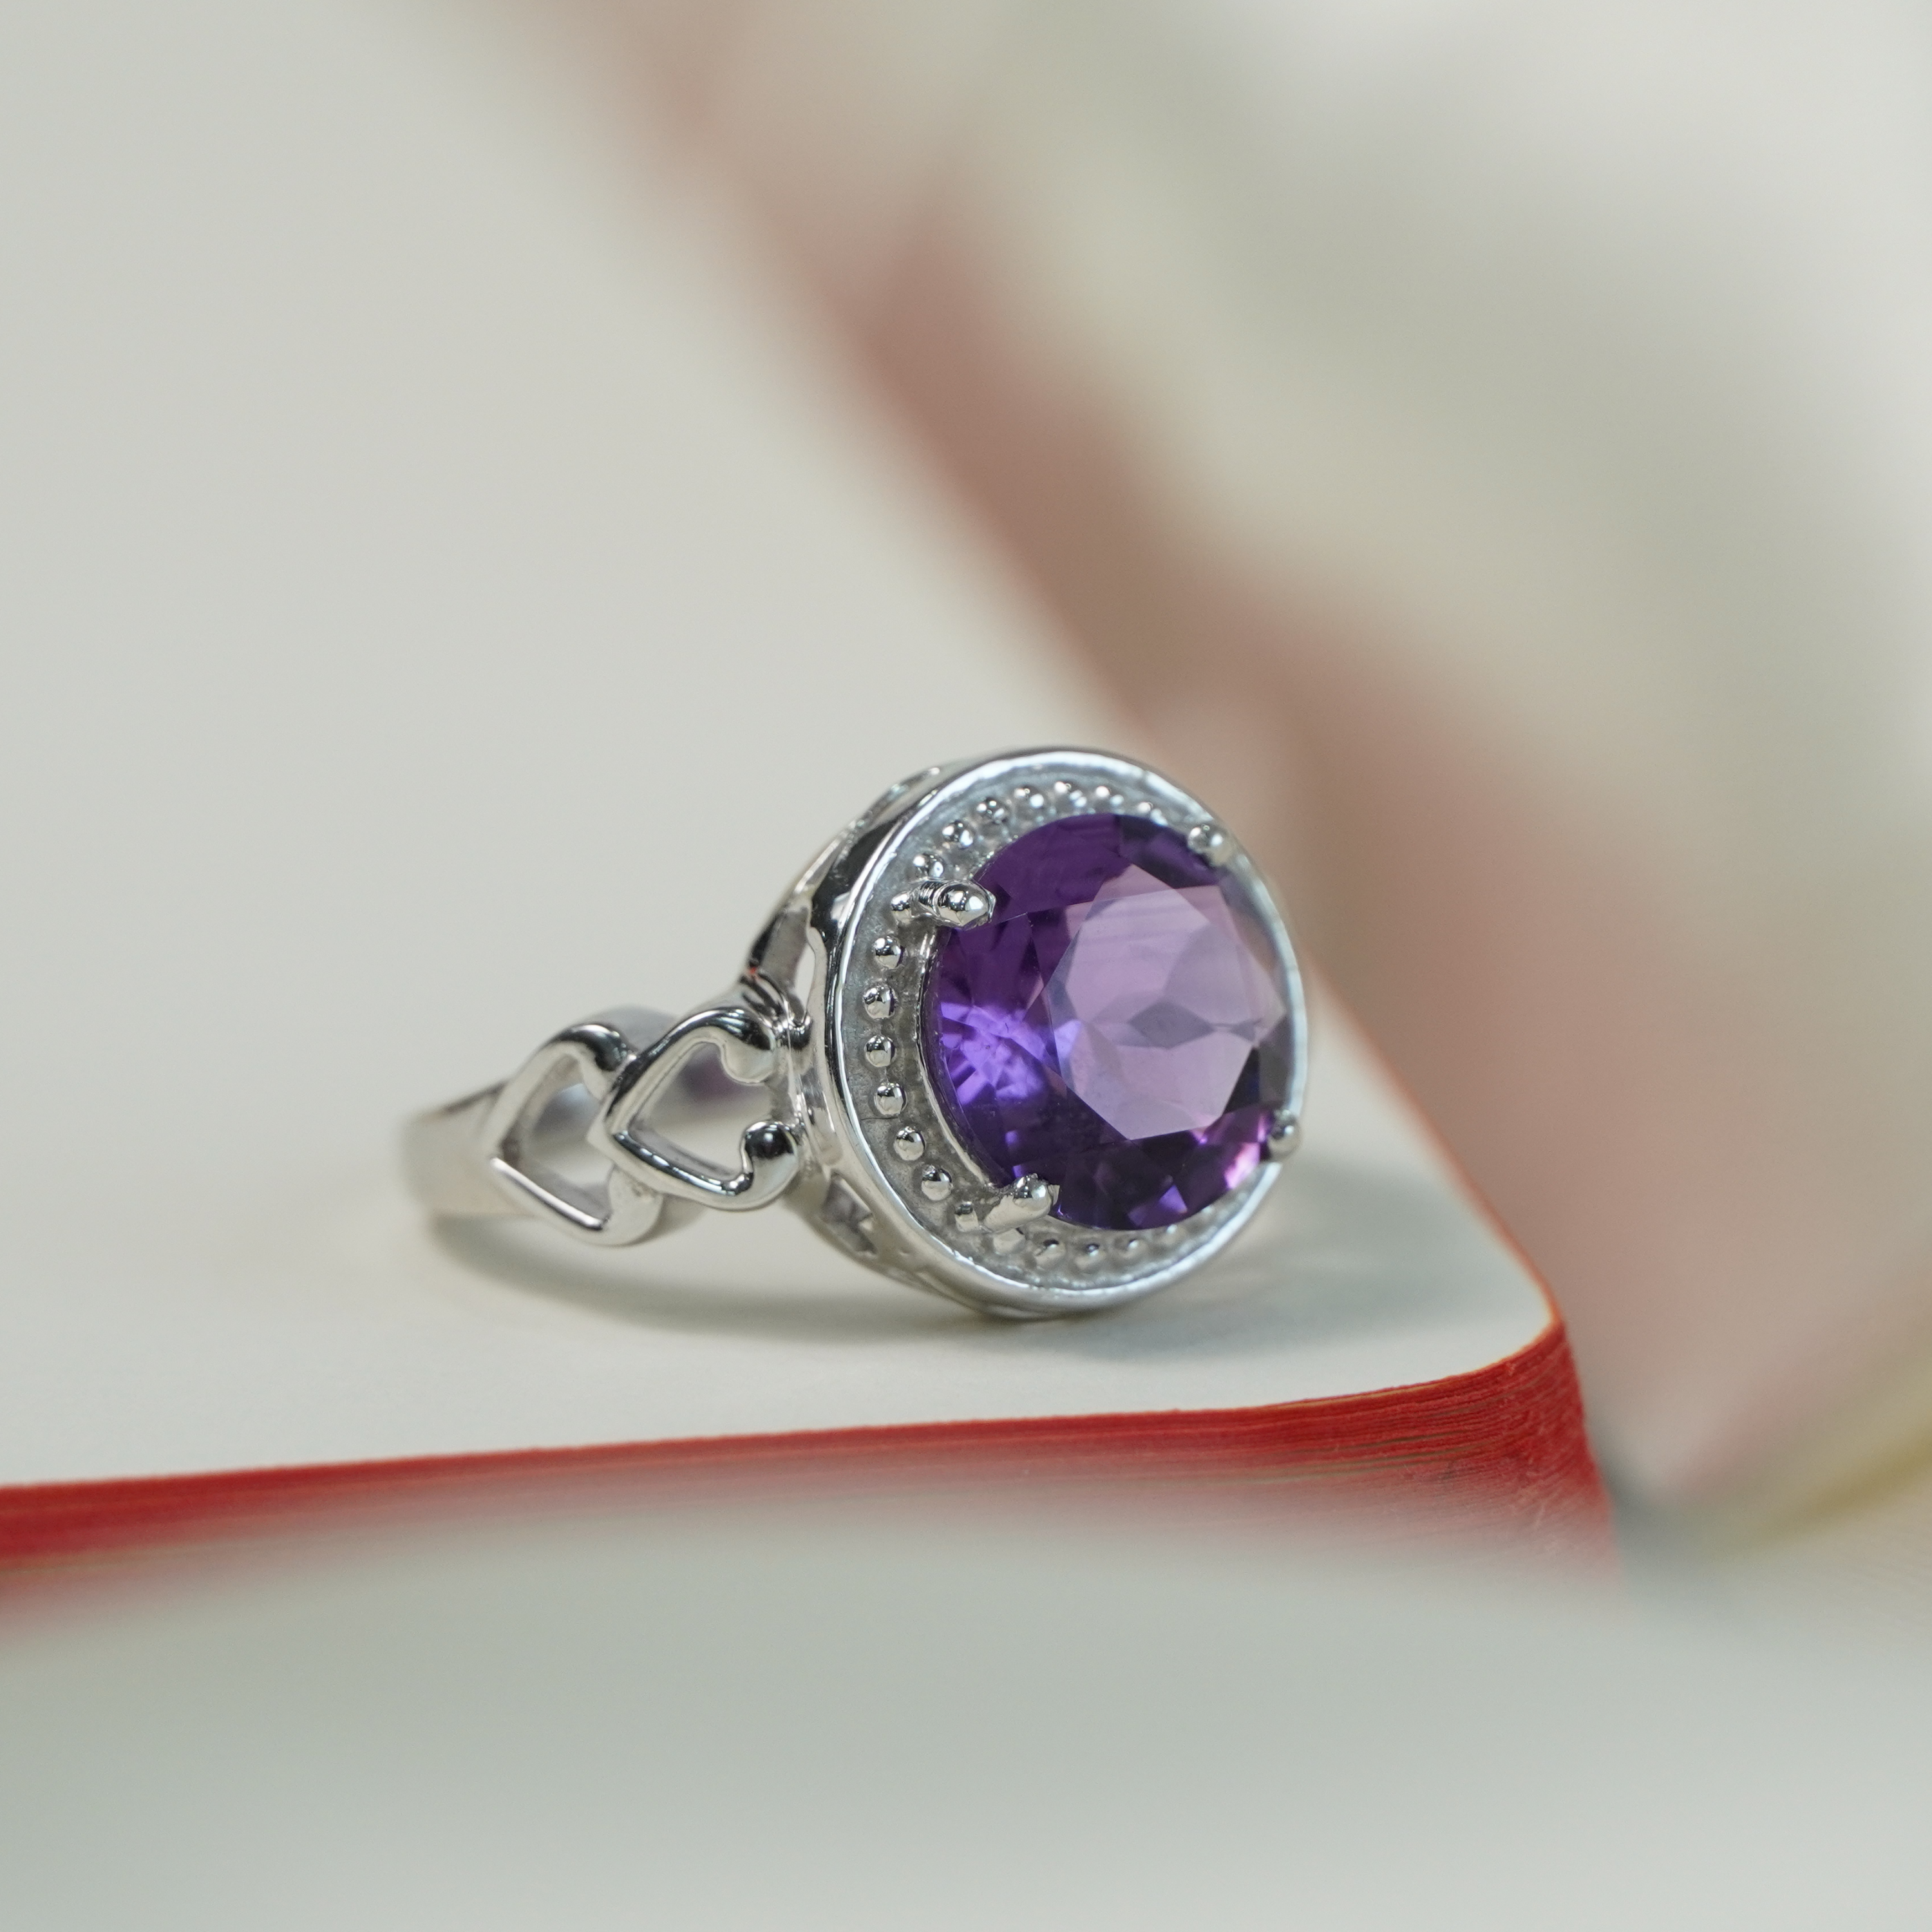 Amazing Amethyst Engagement Ring | Jewelry by Johan - Jewelry by Johan